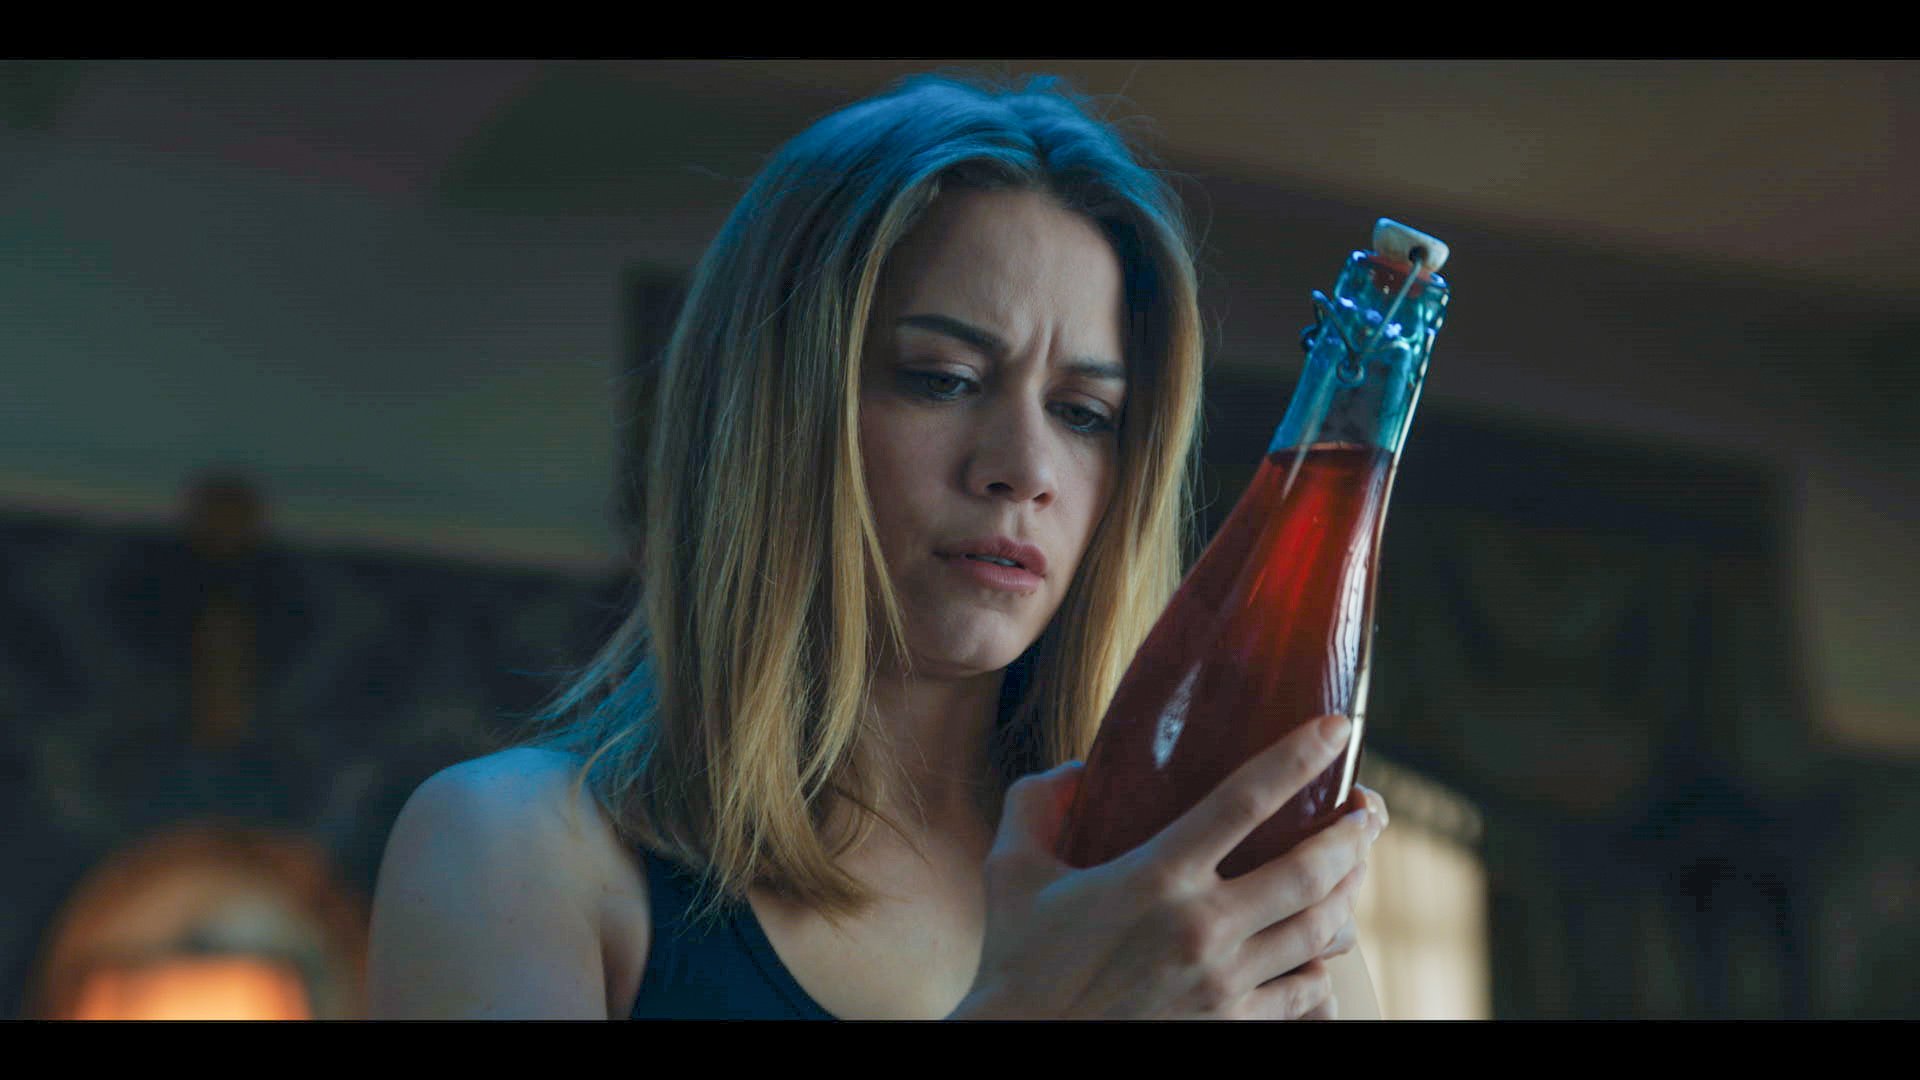 'So Cold the River' star Bethany Joy Lenz stares into an antique bottle of red liquid.